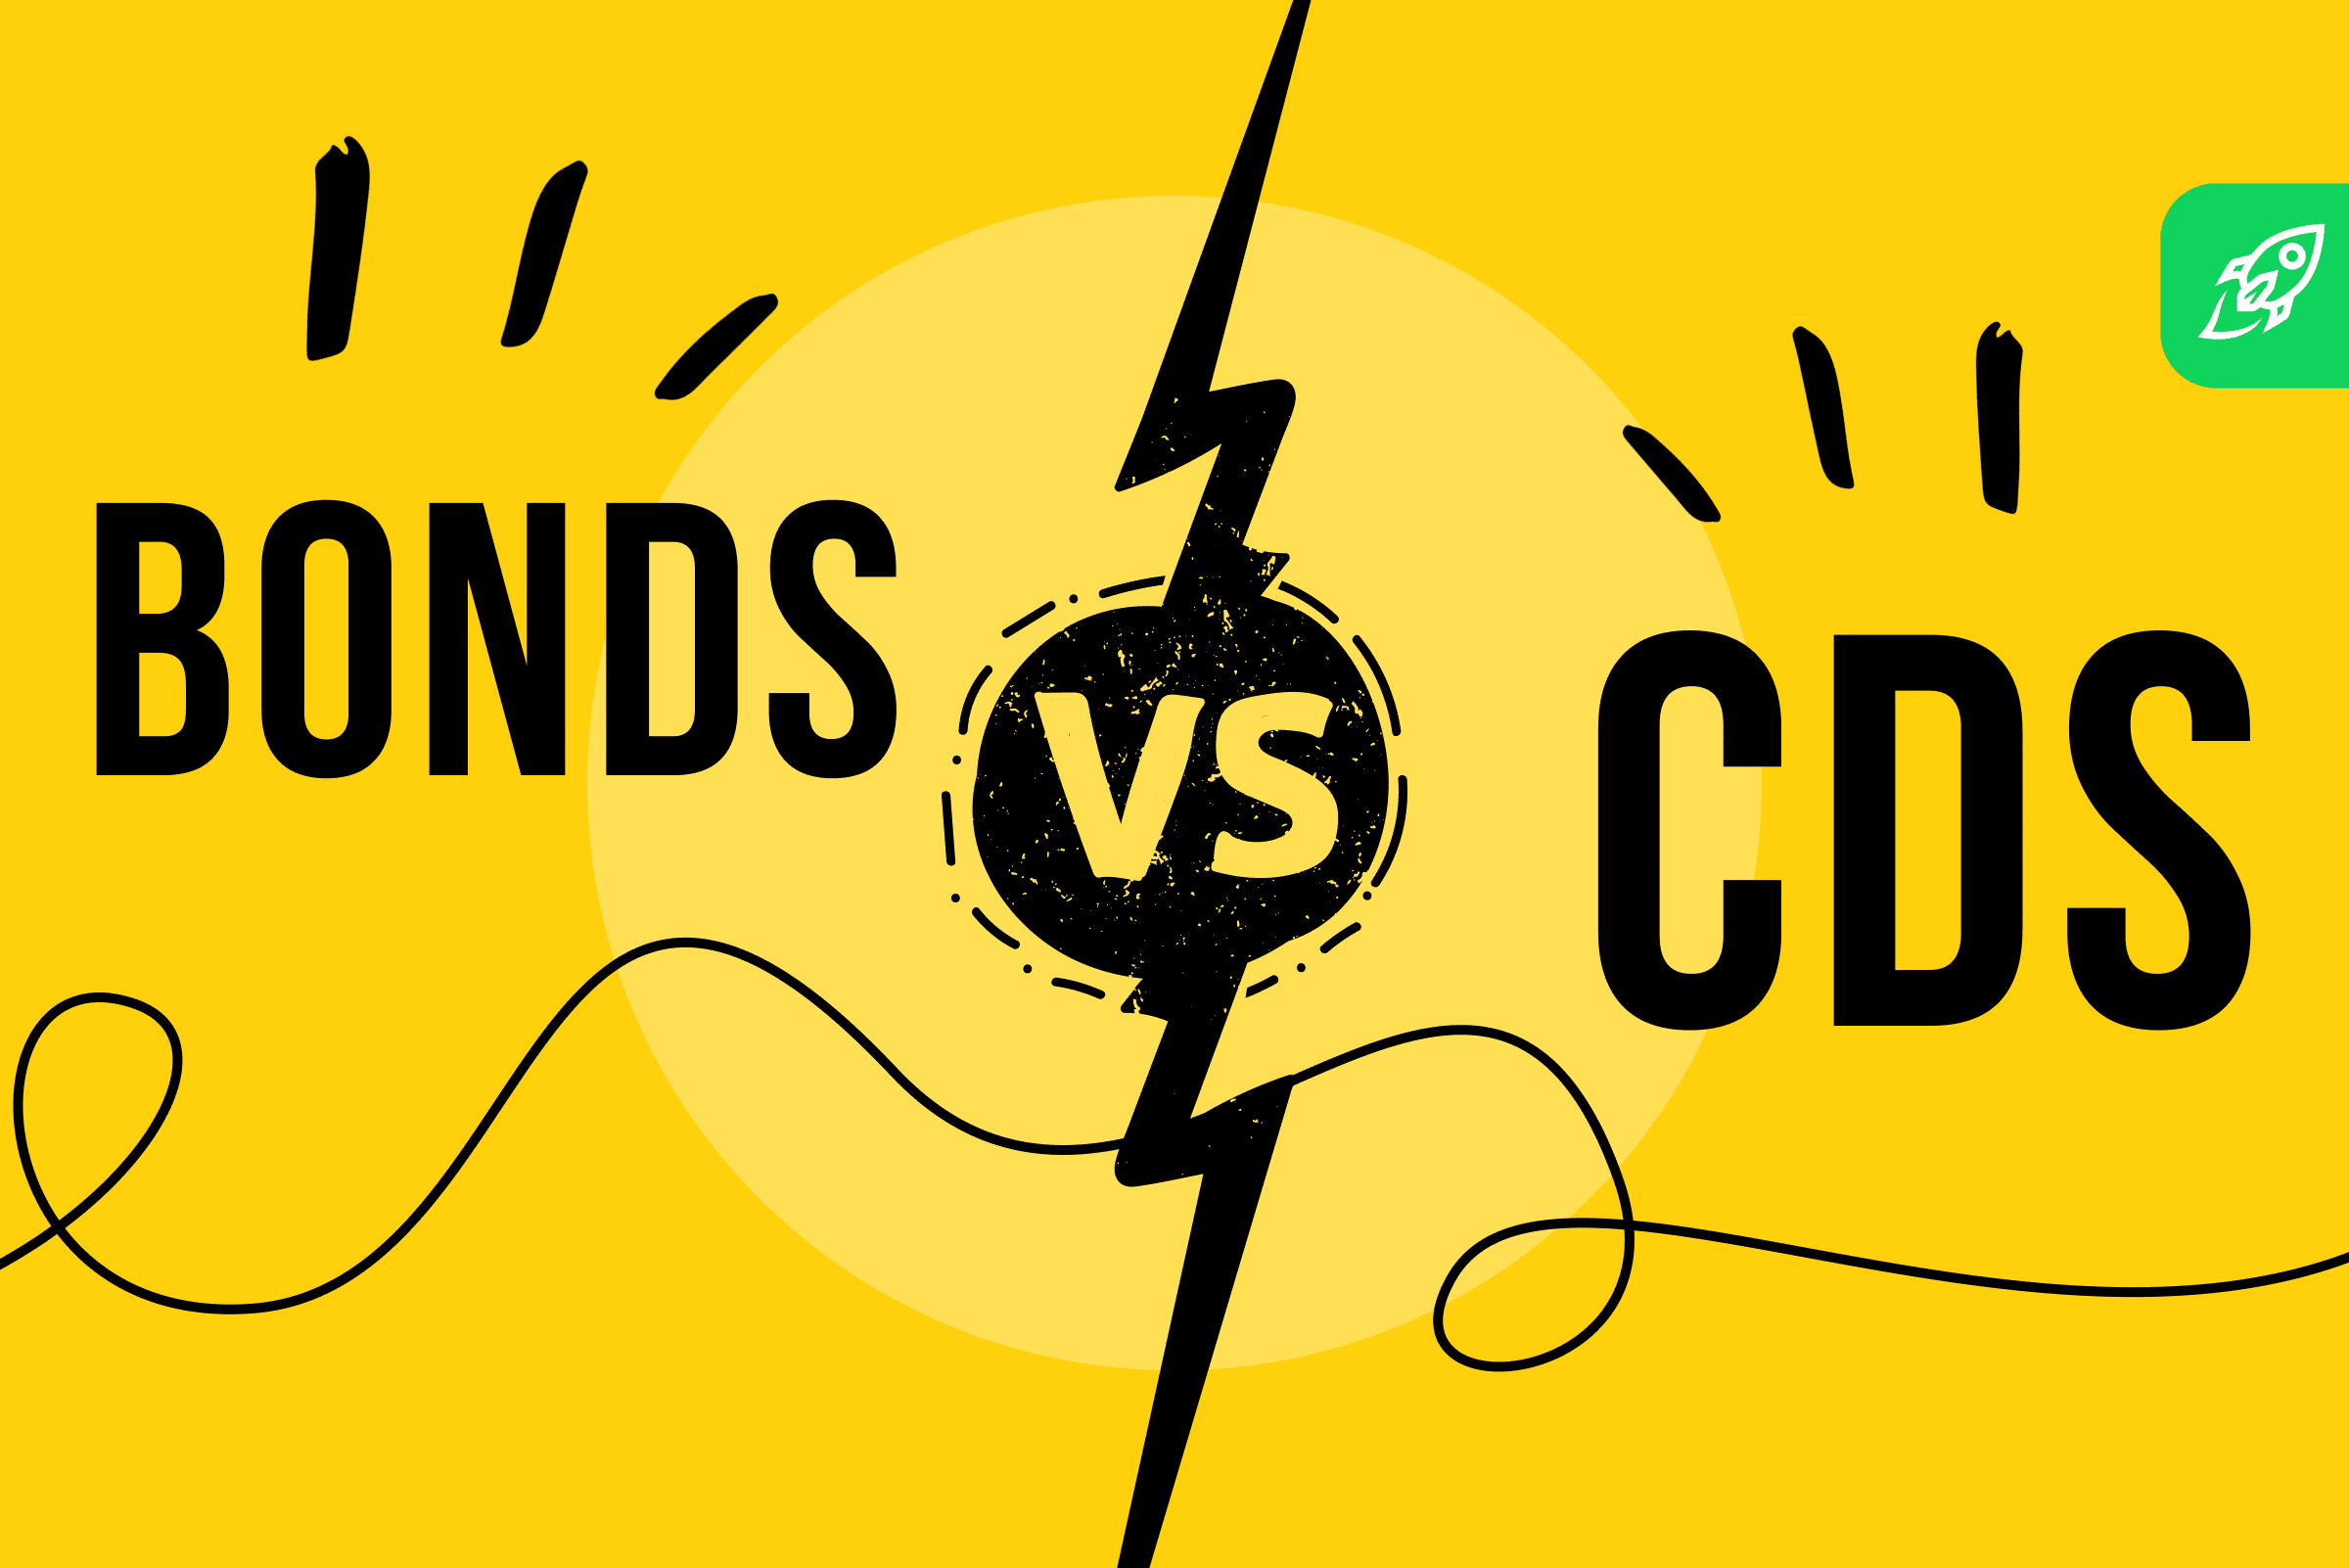 CDs vs. Bonds What's the Difference. A Comprehensive Guide